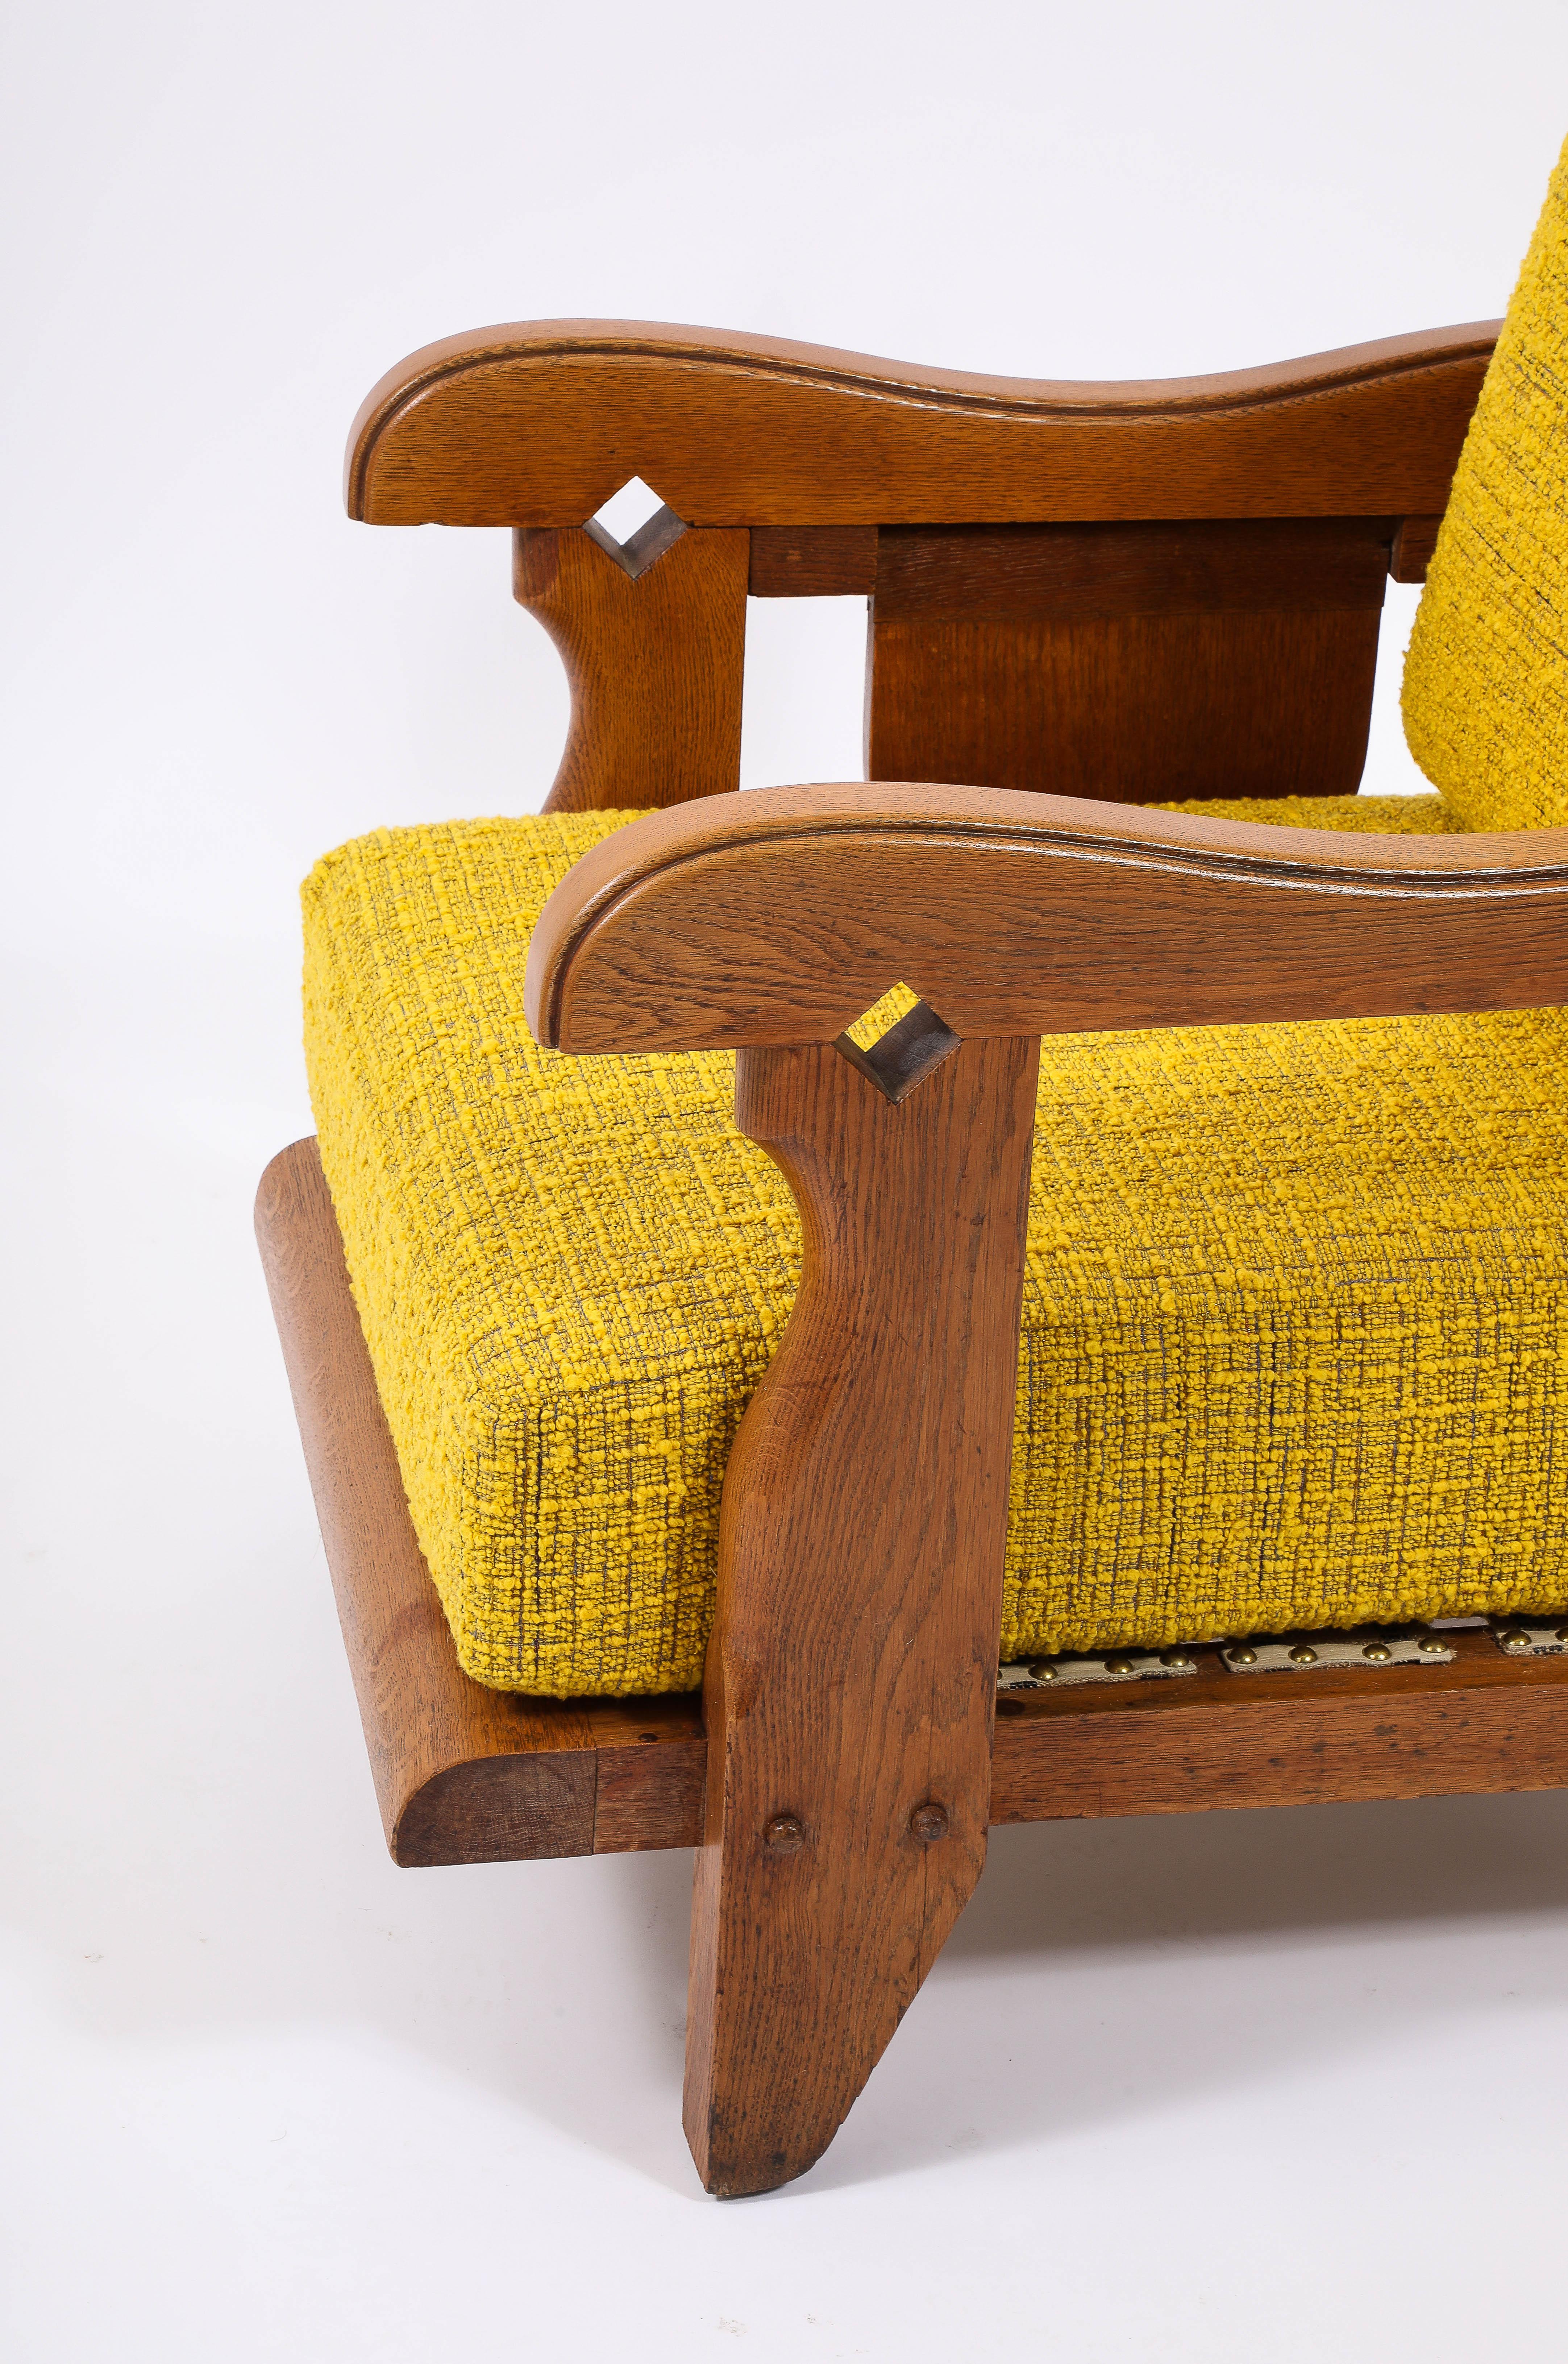 Large Oak & Yellow Wool Armchair with side Shelf, France 1950's For Sale 5